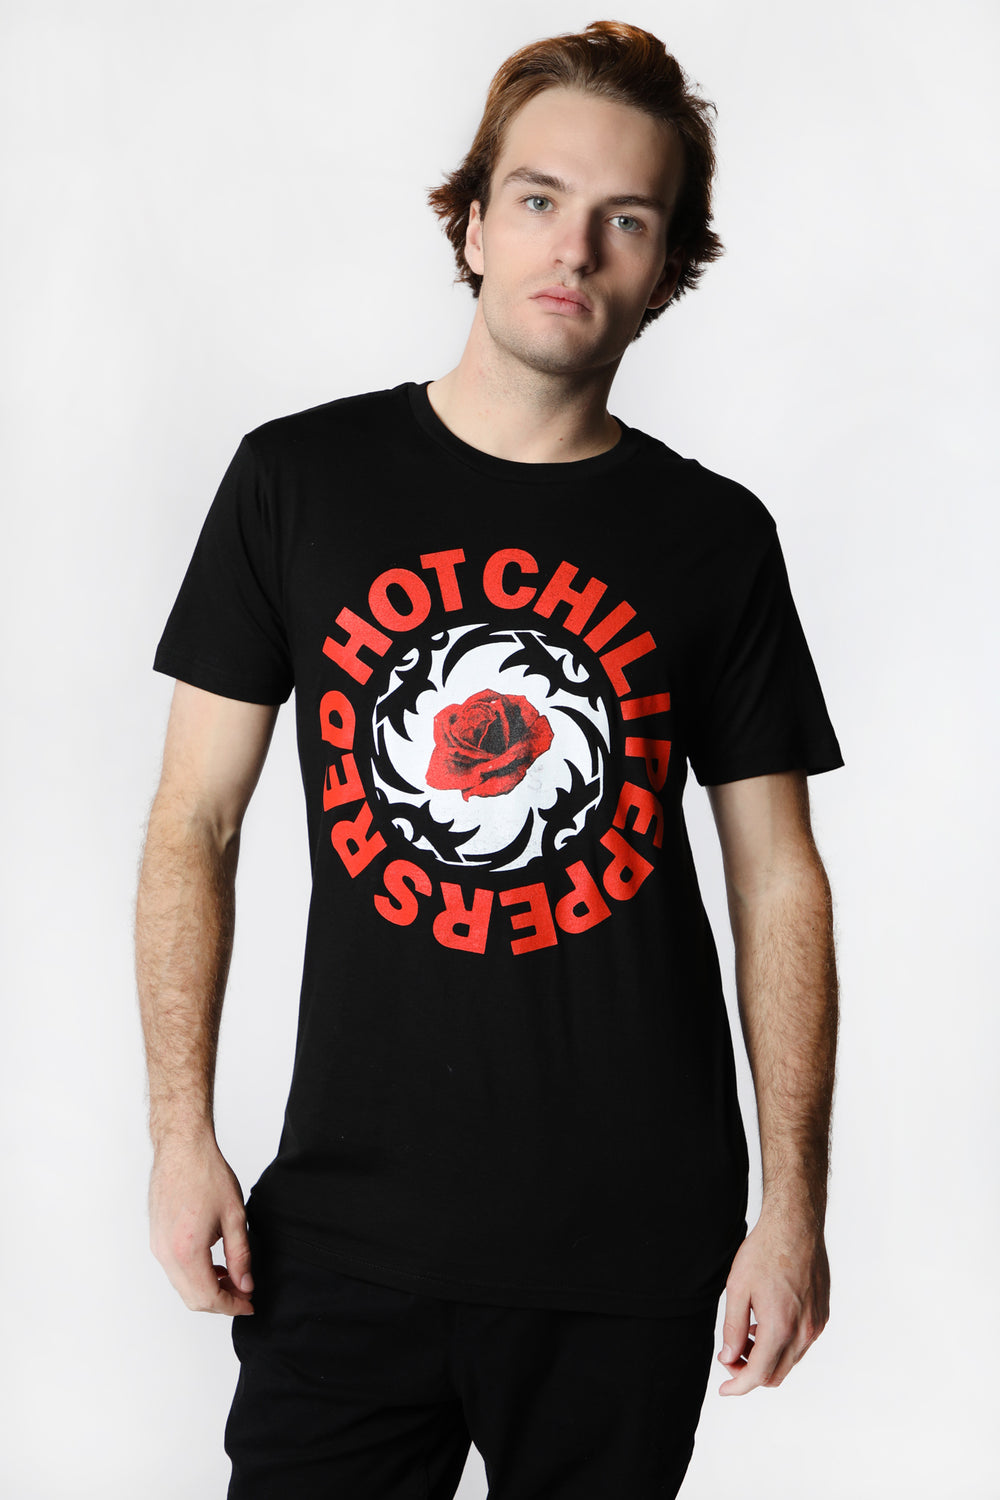 Mens Red Hot Chili Peppers Thorn Rose T-Shirt Mens Red Hot Chili Peppers Thorn Rose T-Shirt